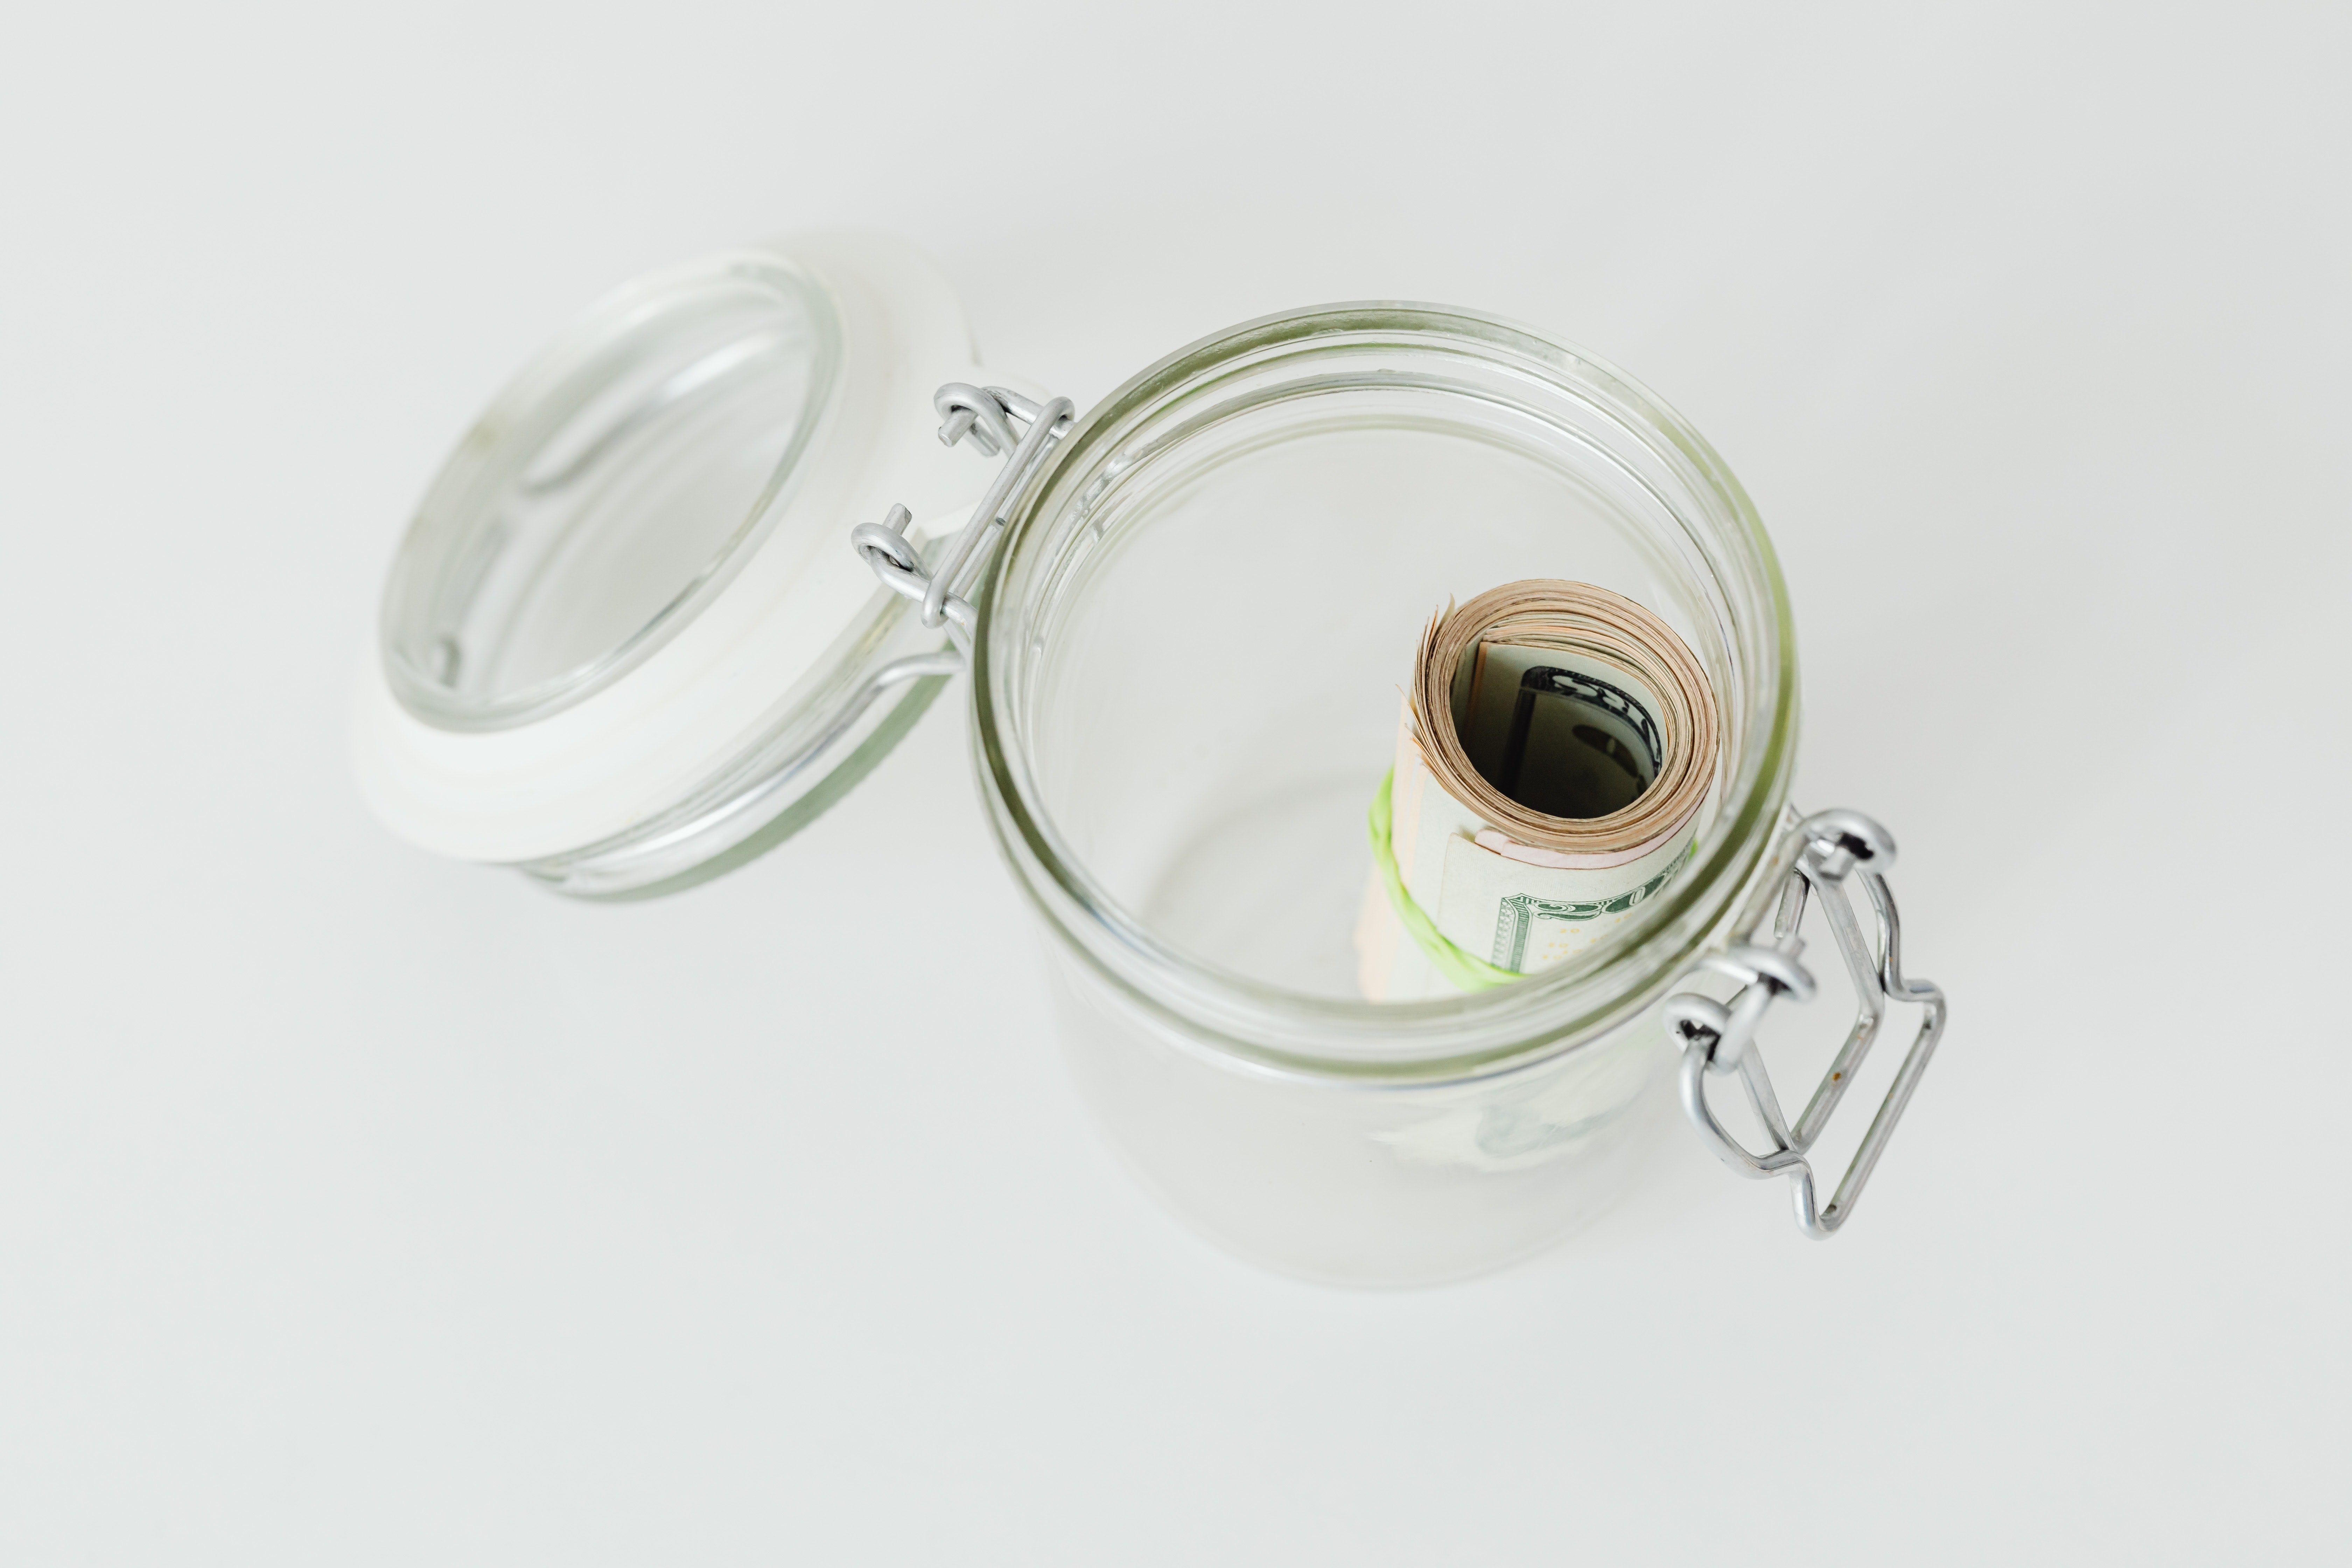 Nick discovered his landlady had hidden a fortune in the kitchen jars.  |  Source: Pexels